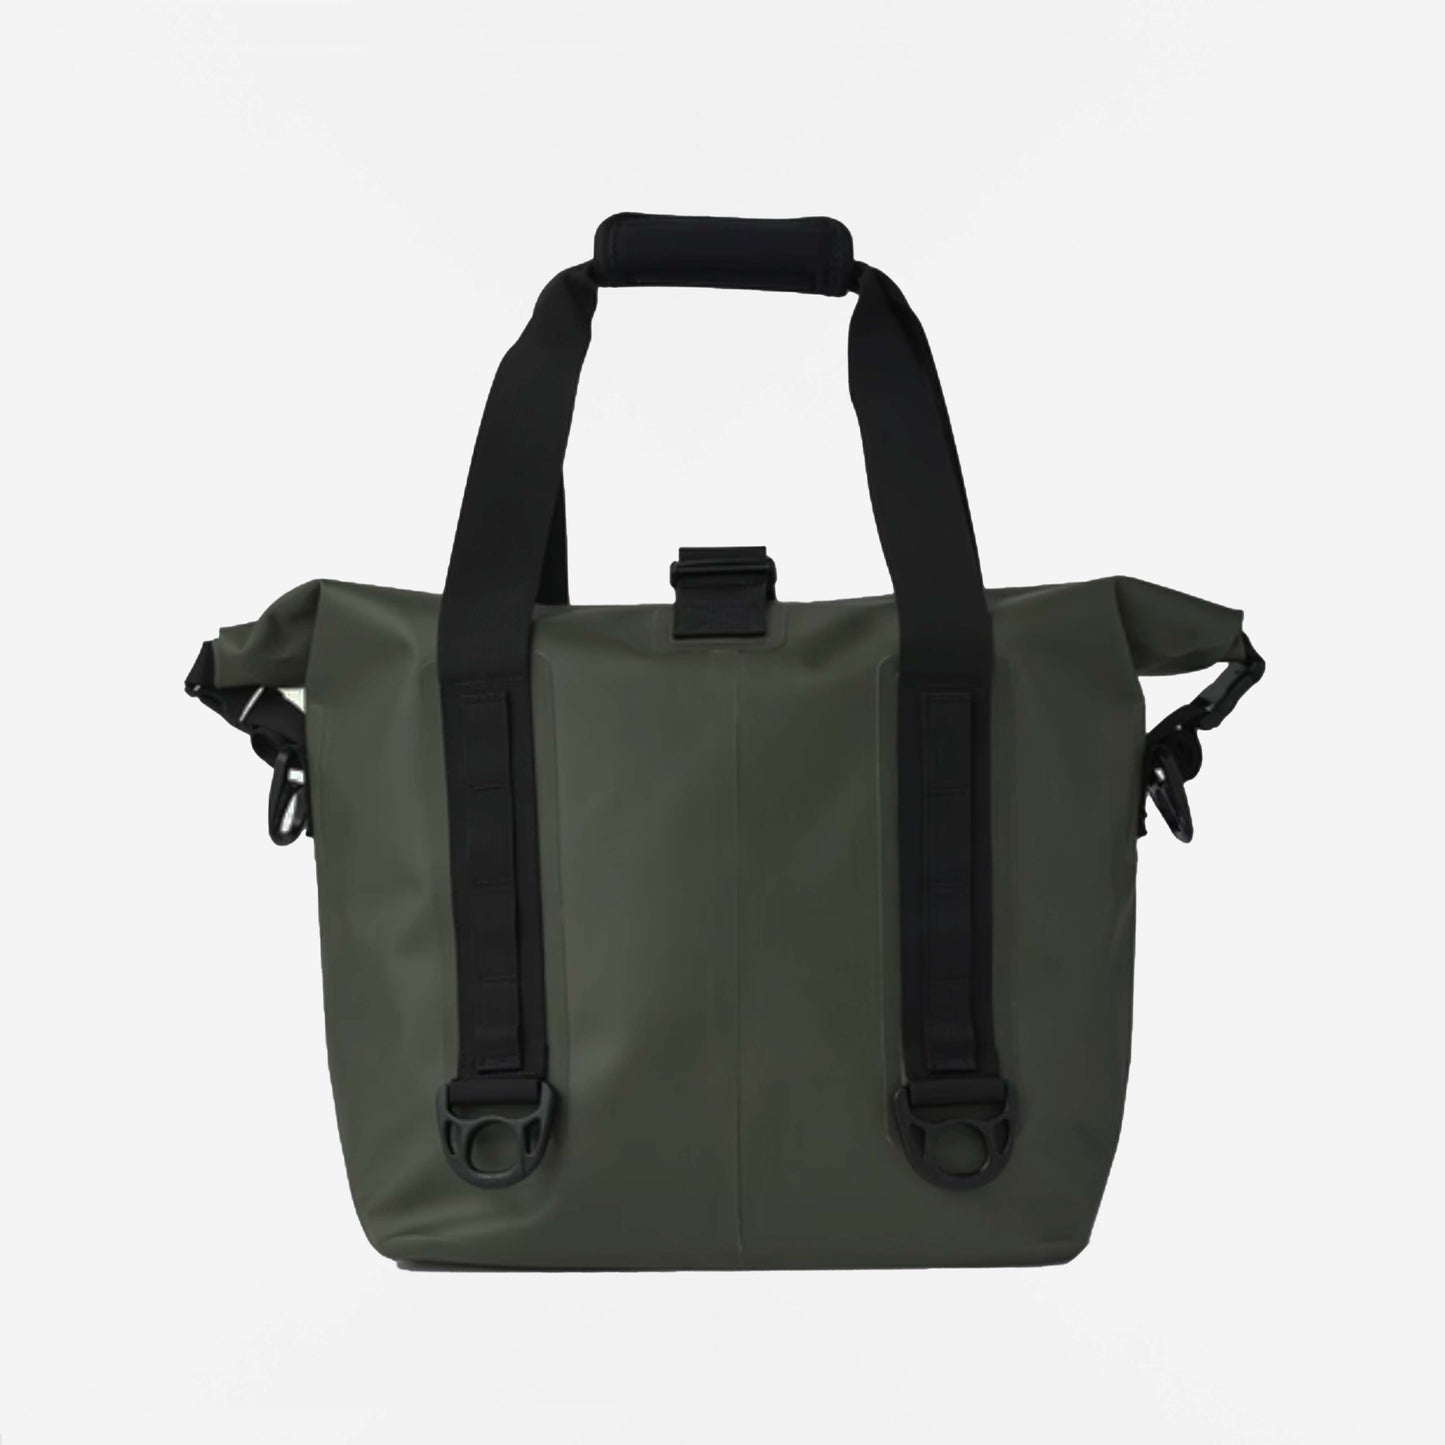 Filson Dry Roll Top Tote Bag